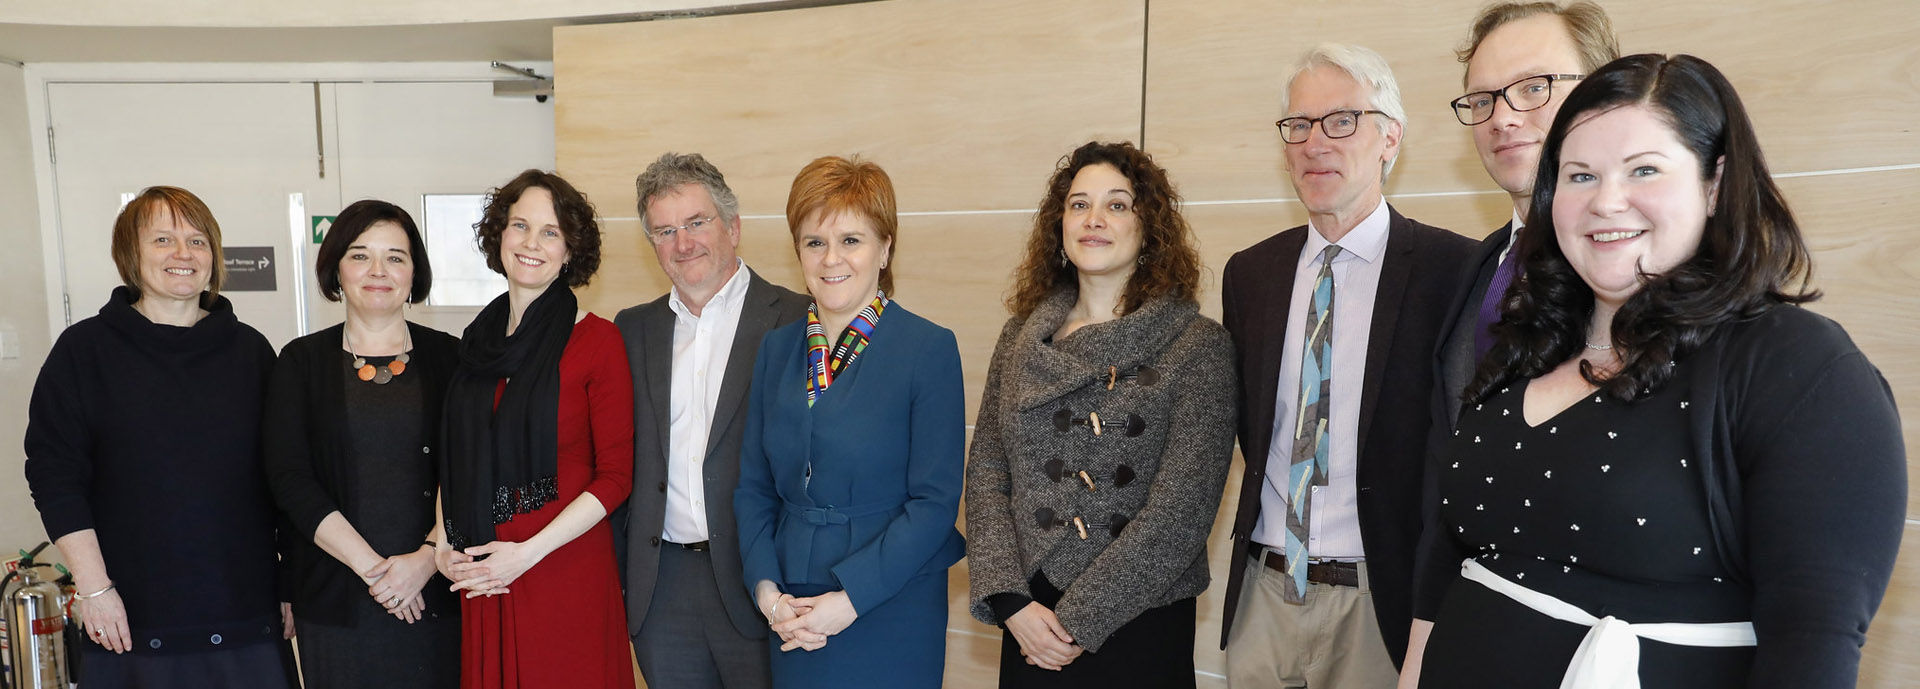 The First Minister’s Advisory Group on Human Rights Leadership